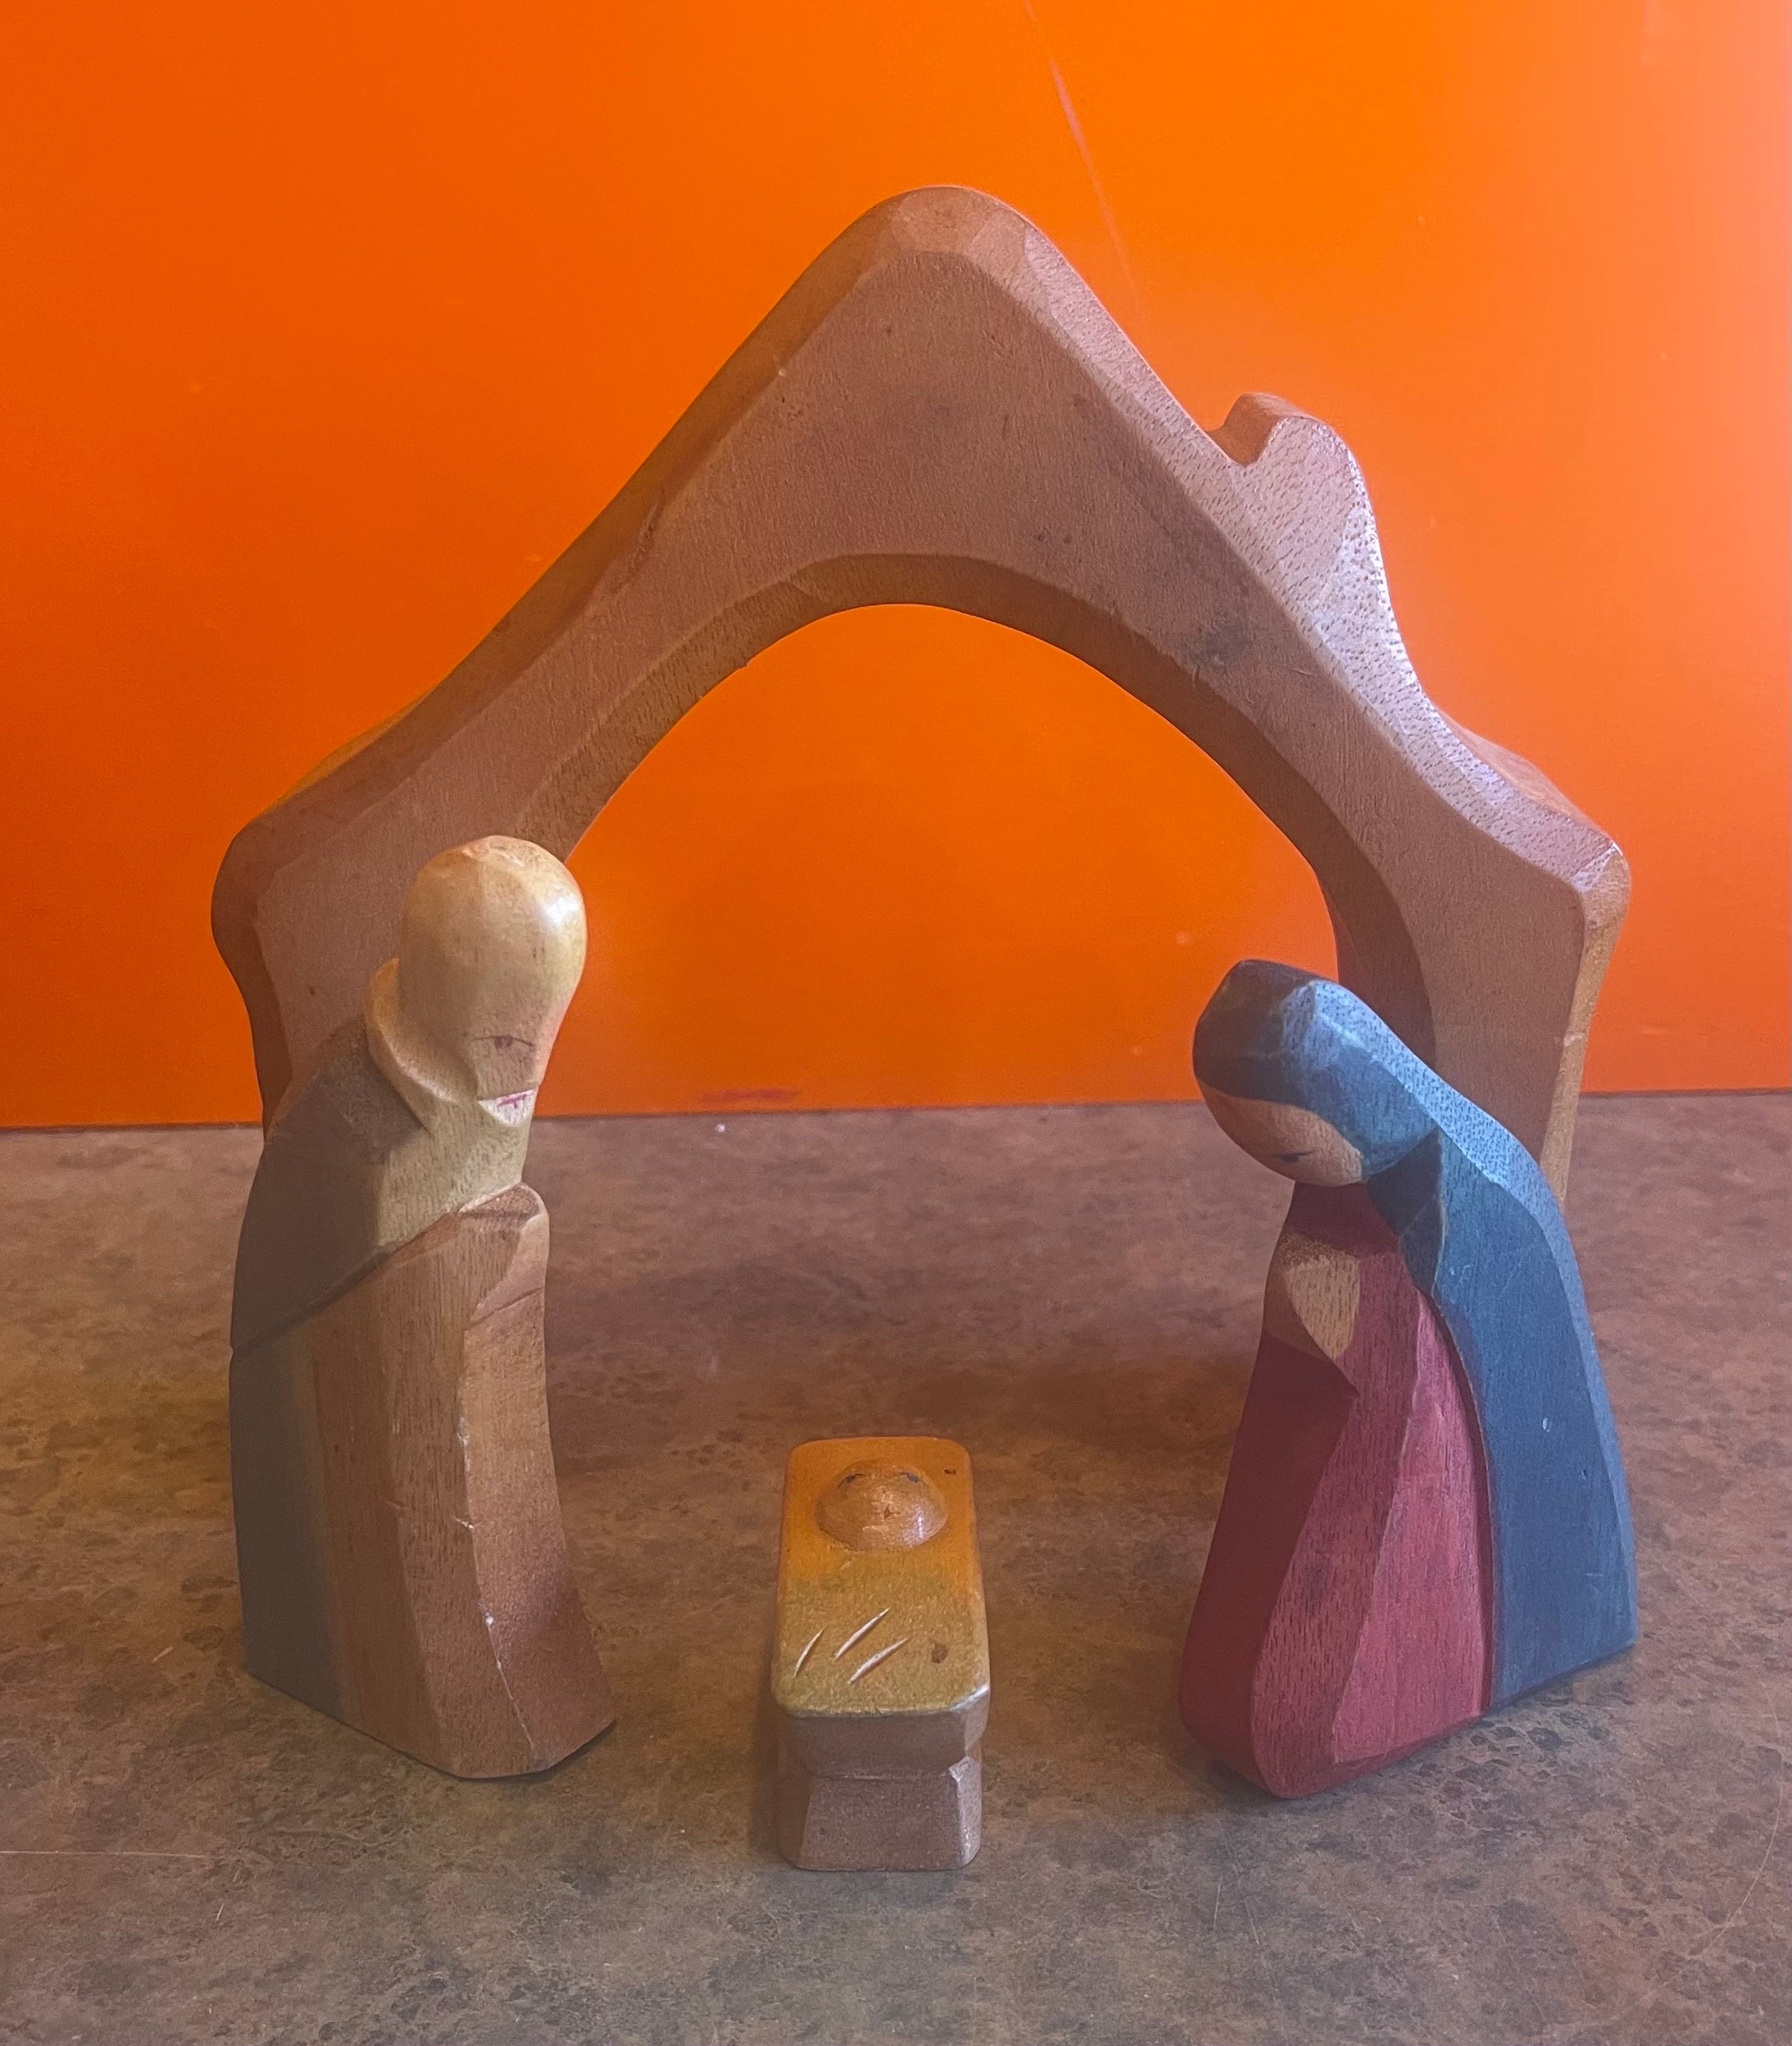 Rare vintage hand carved 16 piece nativity set by Department 56, circa 1980s. Each piece is hand carved wood that is hand painted; the set comes with 16 pieces (including a manager, 3 trees, 3 wiseman and 6 animals, Mary, Joseph and Baby Jesus).